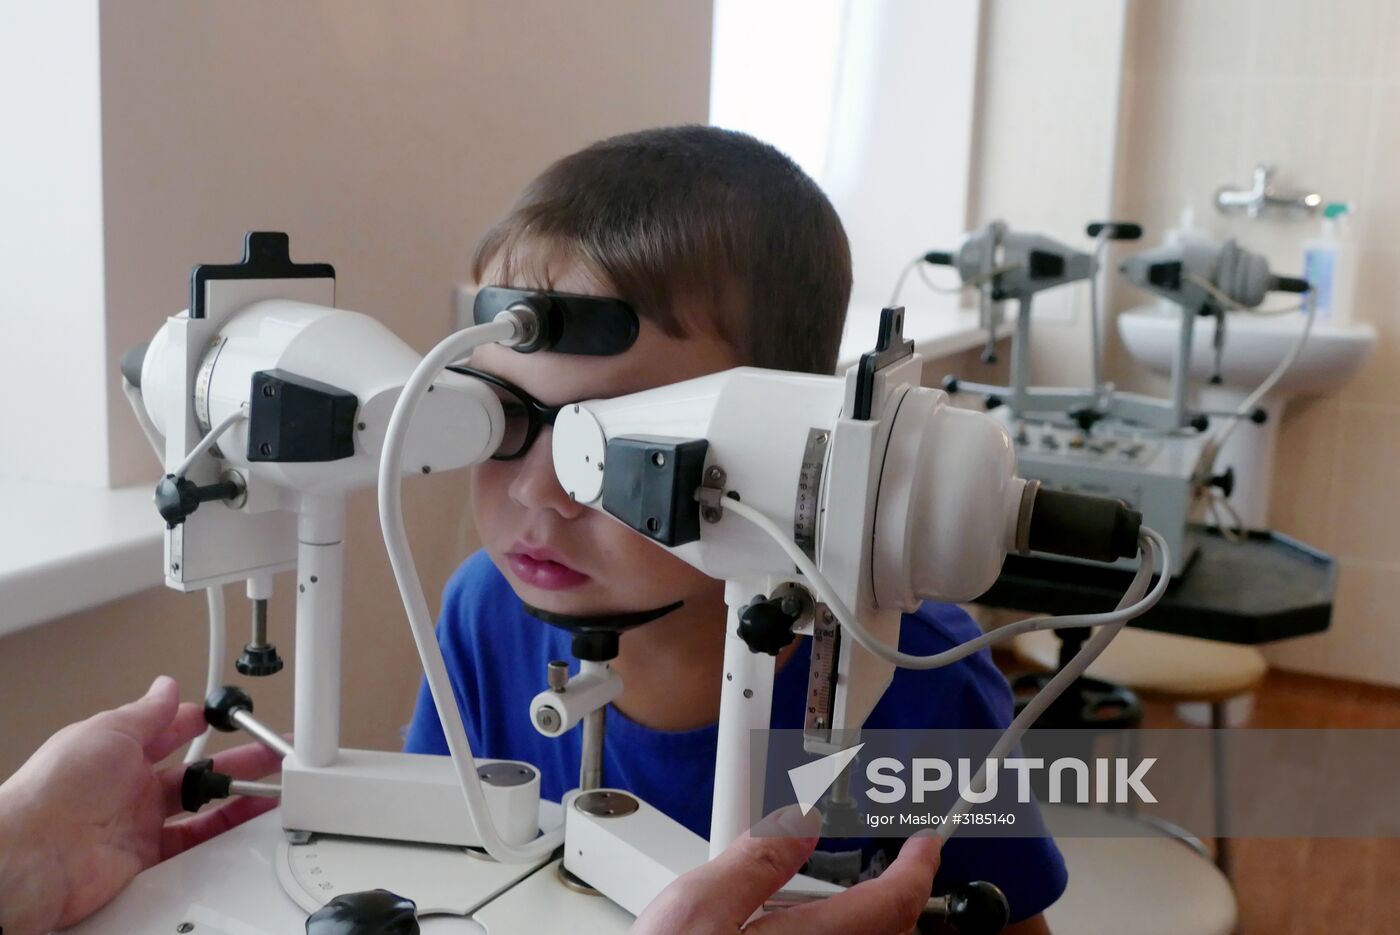 Ophthalmology ward opens at Republican Hospital for Children in Donetsk